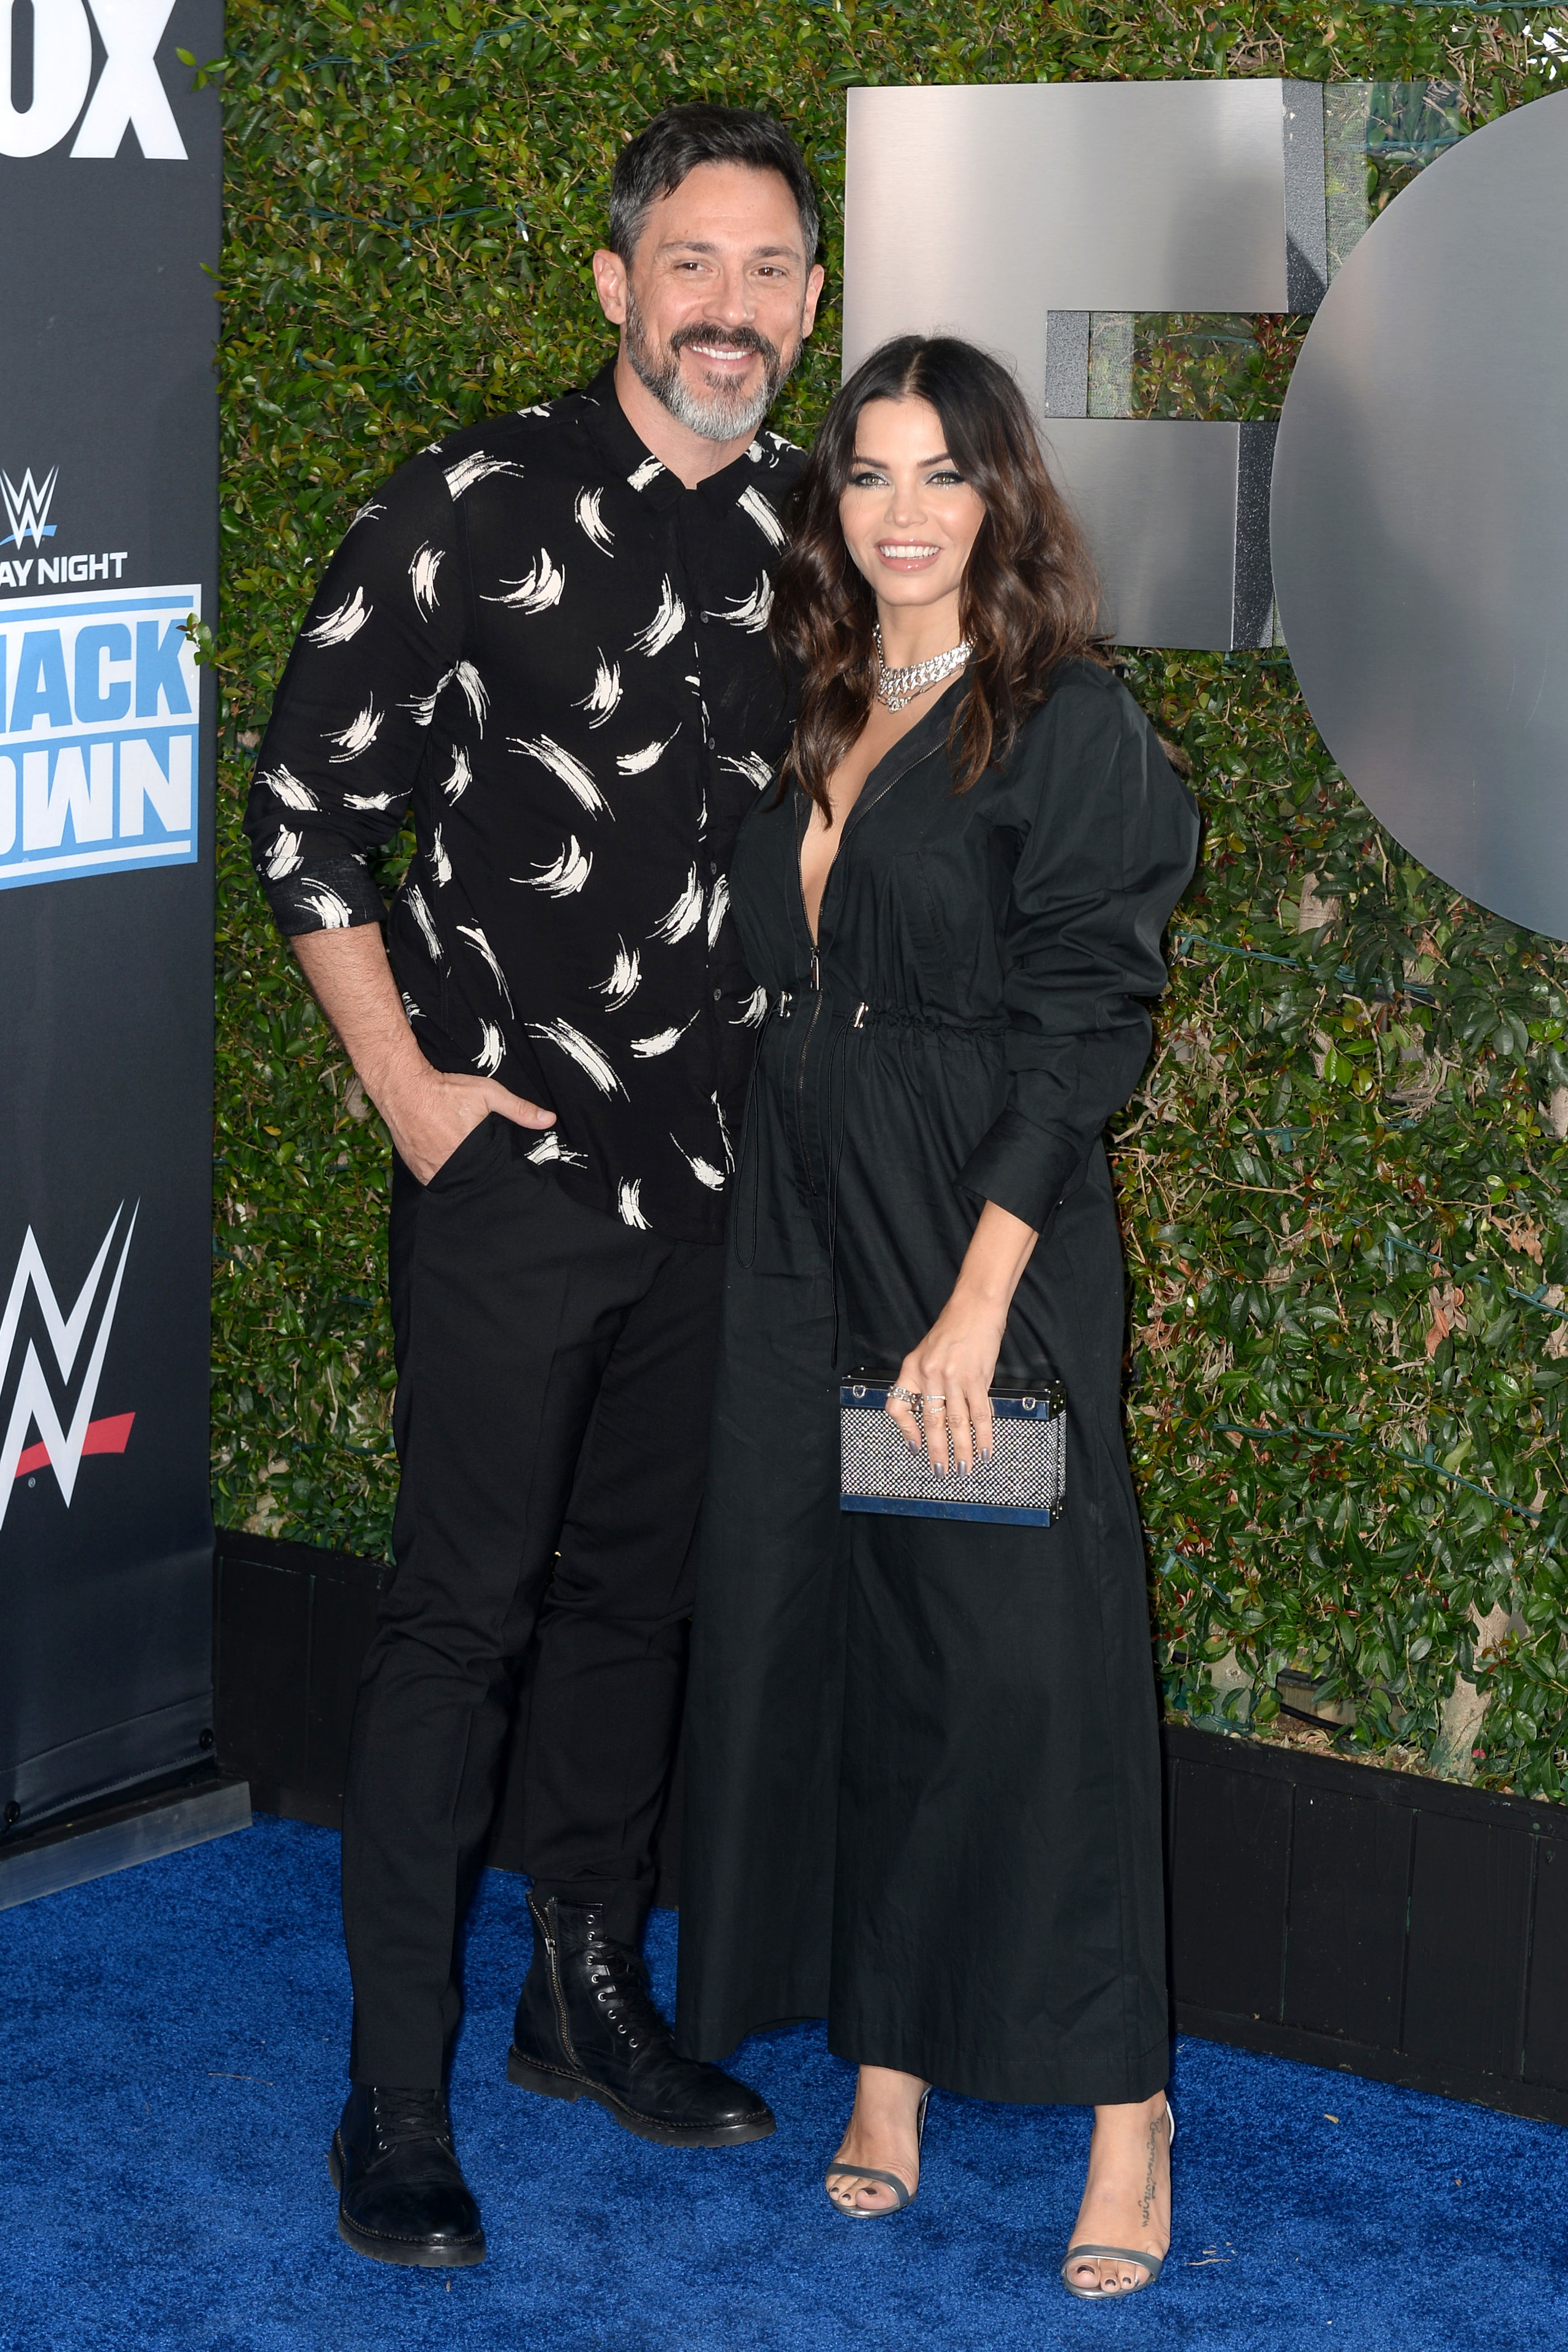 <p>Dancer-actress Jenna Dewan fell for Tony- and Grammy-winning Broadway actor-musician Steve Kazee in 2018 -- but it turns out that she actually met him years earlier when she was happily married to Channing Tatum. "I had met Steve years ago in a flash, it must've been five minutes," she told People magazine in October 2019, shortly after revealing that she and Steve were <a href="https://www.wonderwall.com/awards-events/jenna-dewan-and-boyfriend-steve-kazee-make-first-red-carpet-appearance-announcing-pregnancy-3021258.article">expecting a baby</a>. "I saw him perform in 'Once' on Broadway and I was just totally blown away by his talent. My mom was with me, and we got to go backstage and meet the actors. He just had a cool [energy] about him." And that was that. "Obviously I was married and so we never spoke or saw each other again for six years, but I never forgot the moment. And then six years later, obviously it becomes public knowledge that [Channing and I had] <a href="https://www.wonderwall.com/celebrity/couples/channing-tatum-jenna-dewan-breakup-divorce-celeb-love-life-updates-first-week-april-2018-hollywood-romance-report-3013587.gallery">separated</a> and [Steve] contacted me" months later, just as Jenna was, as she puts it, coming "out of my grief tunnel." It started with a phone call that lasted for hours and "it was an instant connection when we met each other," Jenna told People. "There was no way we could avoid it. So in my eyes it was truly, completely meant to be. There was like a lightning bolt behind it." Jenna and Steve <a href="https://www.wonderwall.com/celebrity/jenna-dewan-and-steve-kazees-son-1-month-old-3022608.article">welcomed a son in 2020</a>.</p>